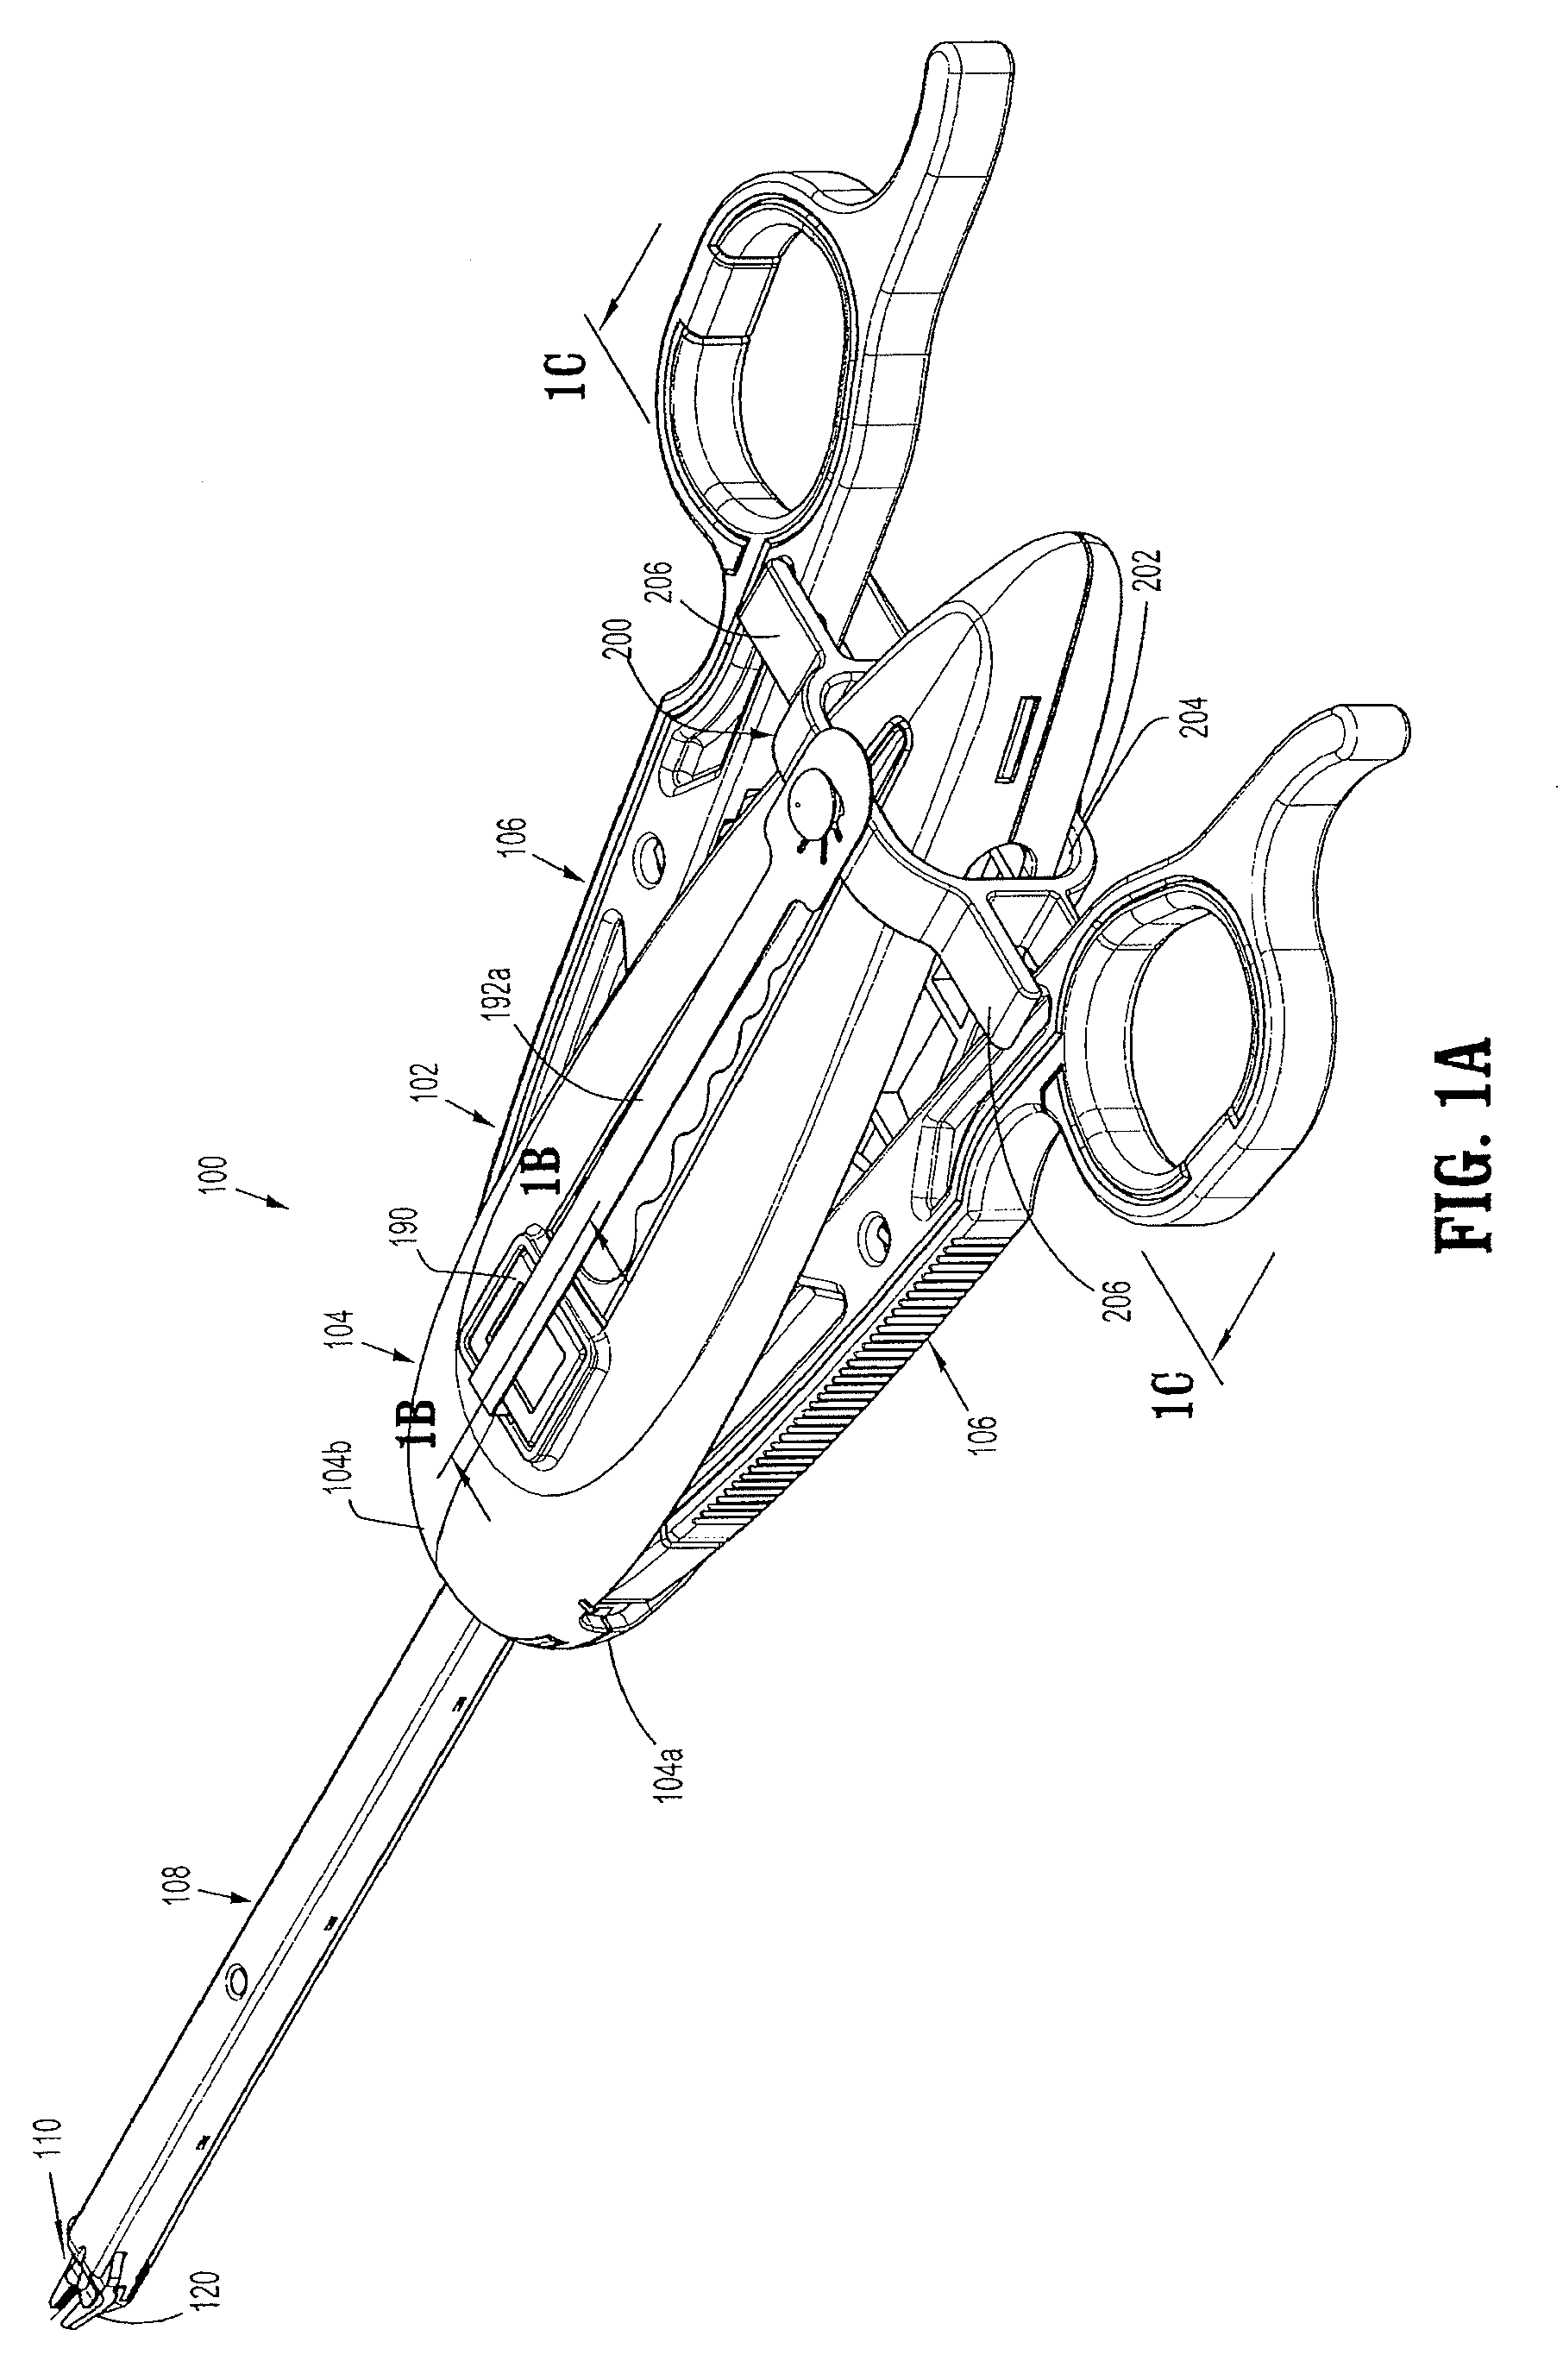 Surgical clip applier and method of assembly